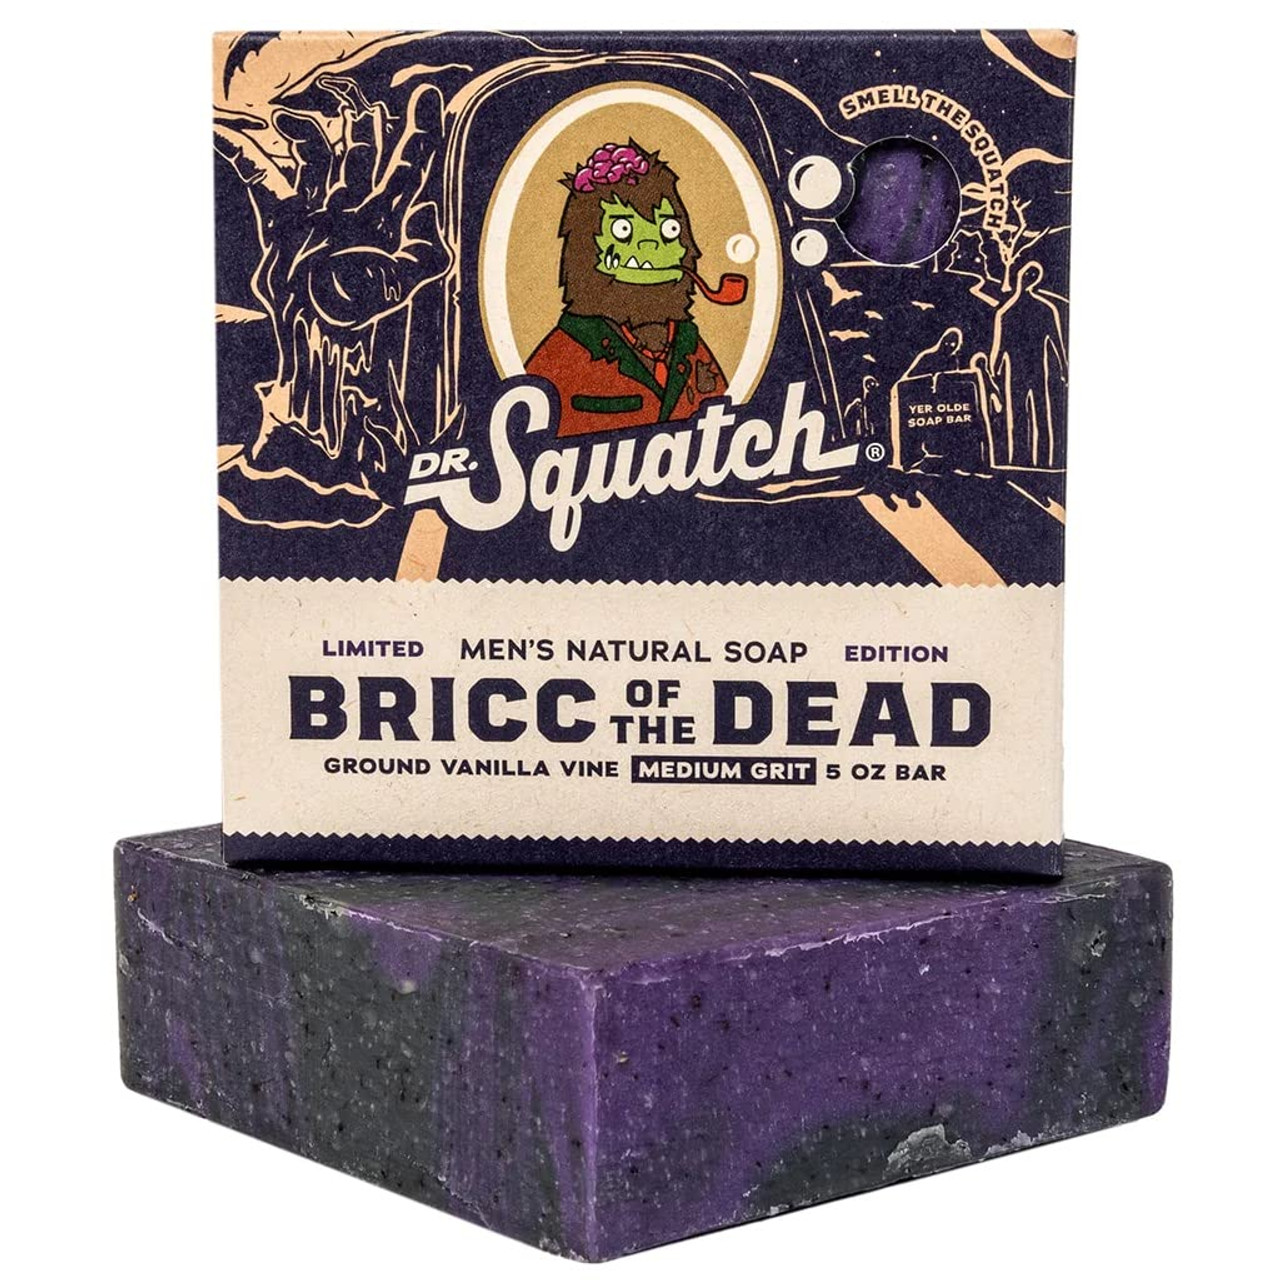 Dr. Squatch Men's Natural Bar Soap for All Skin Types, Spidey Suds